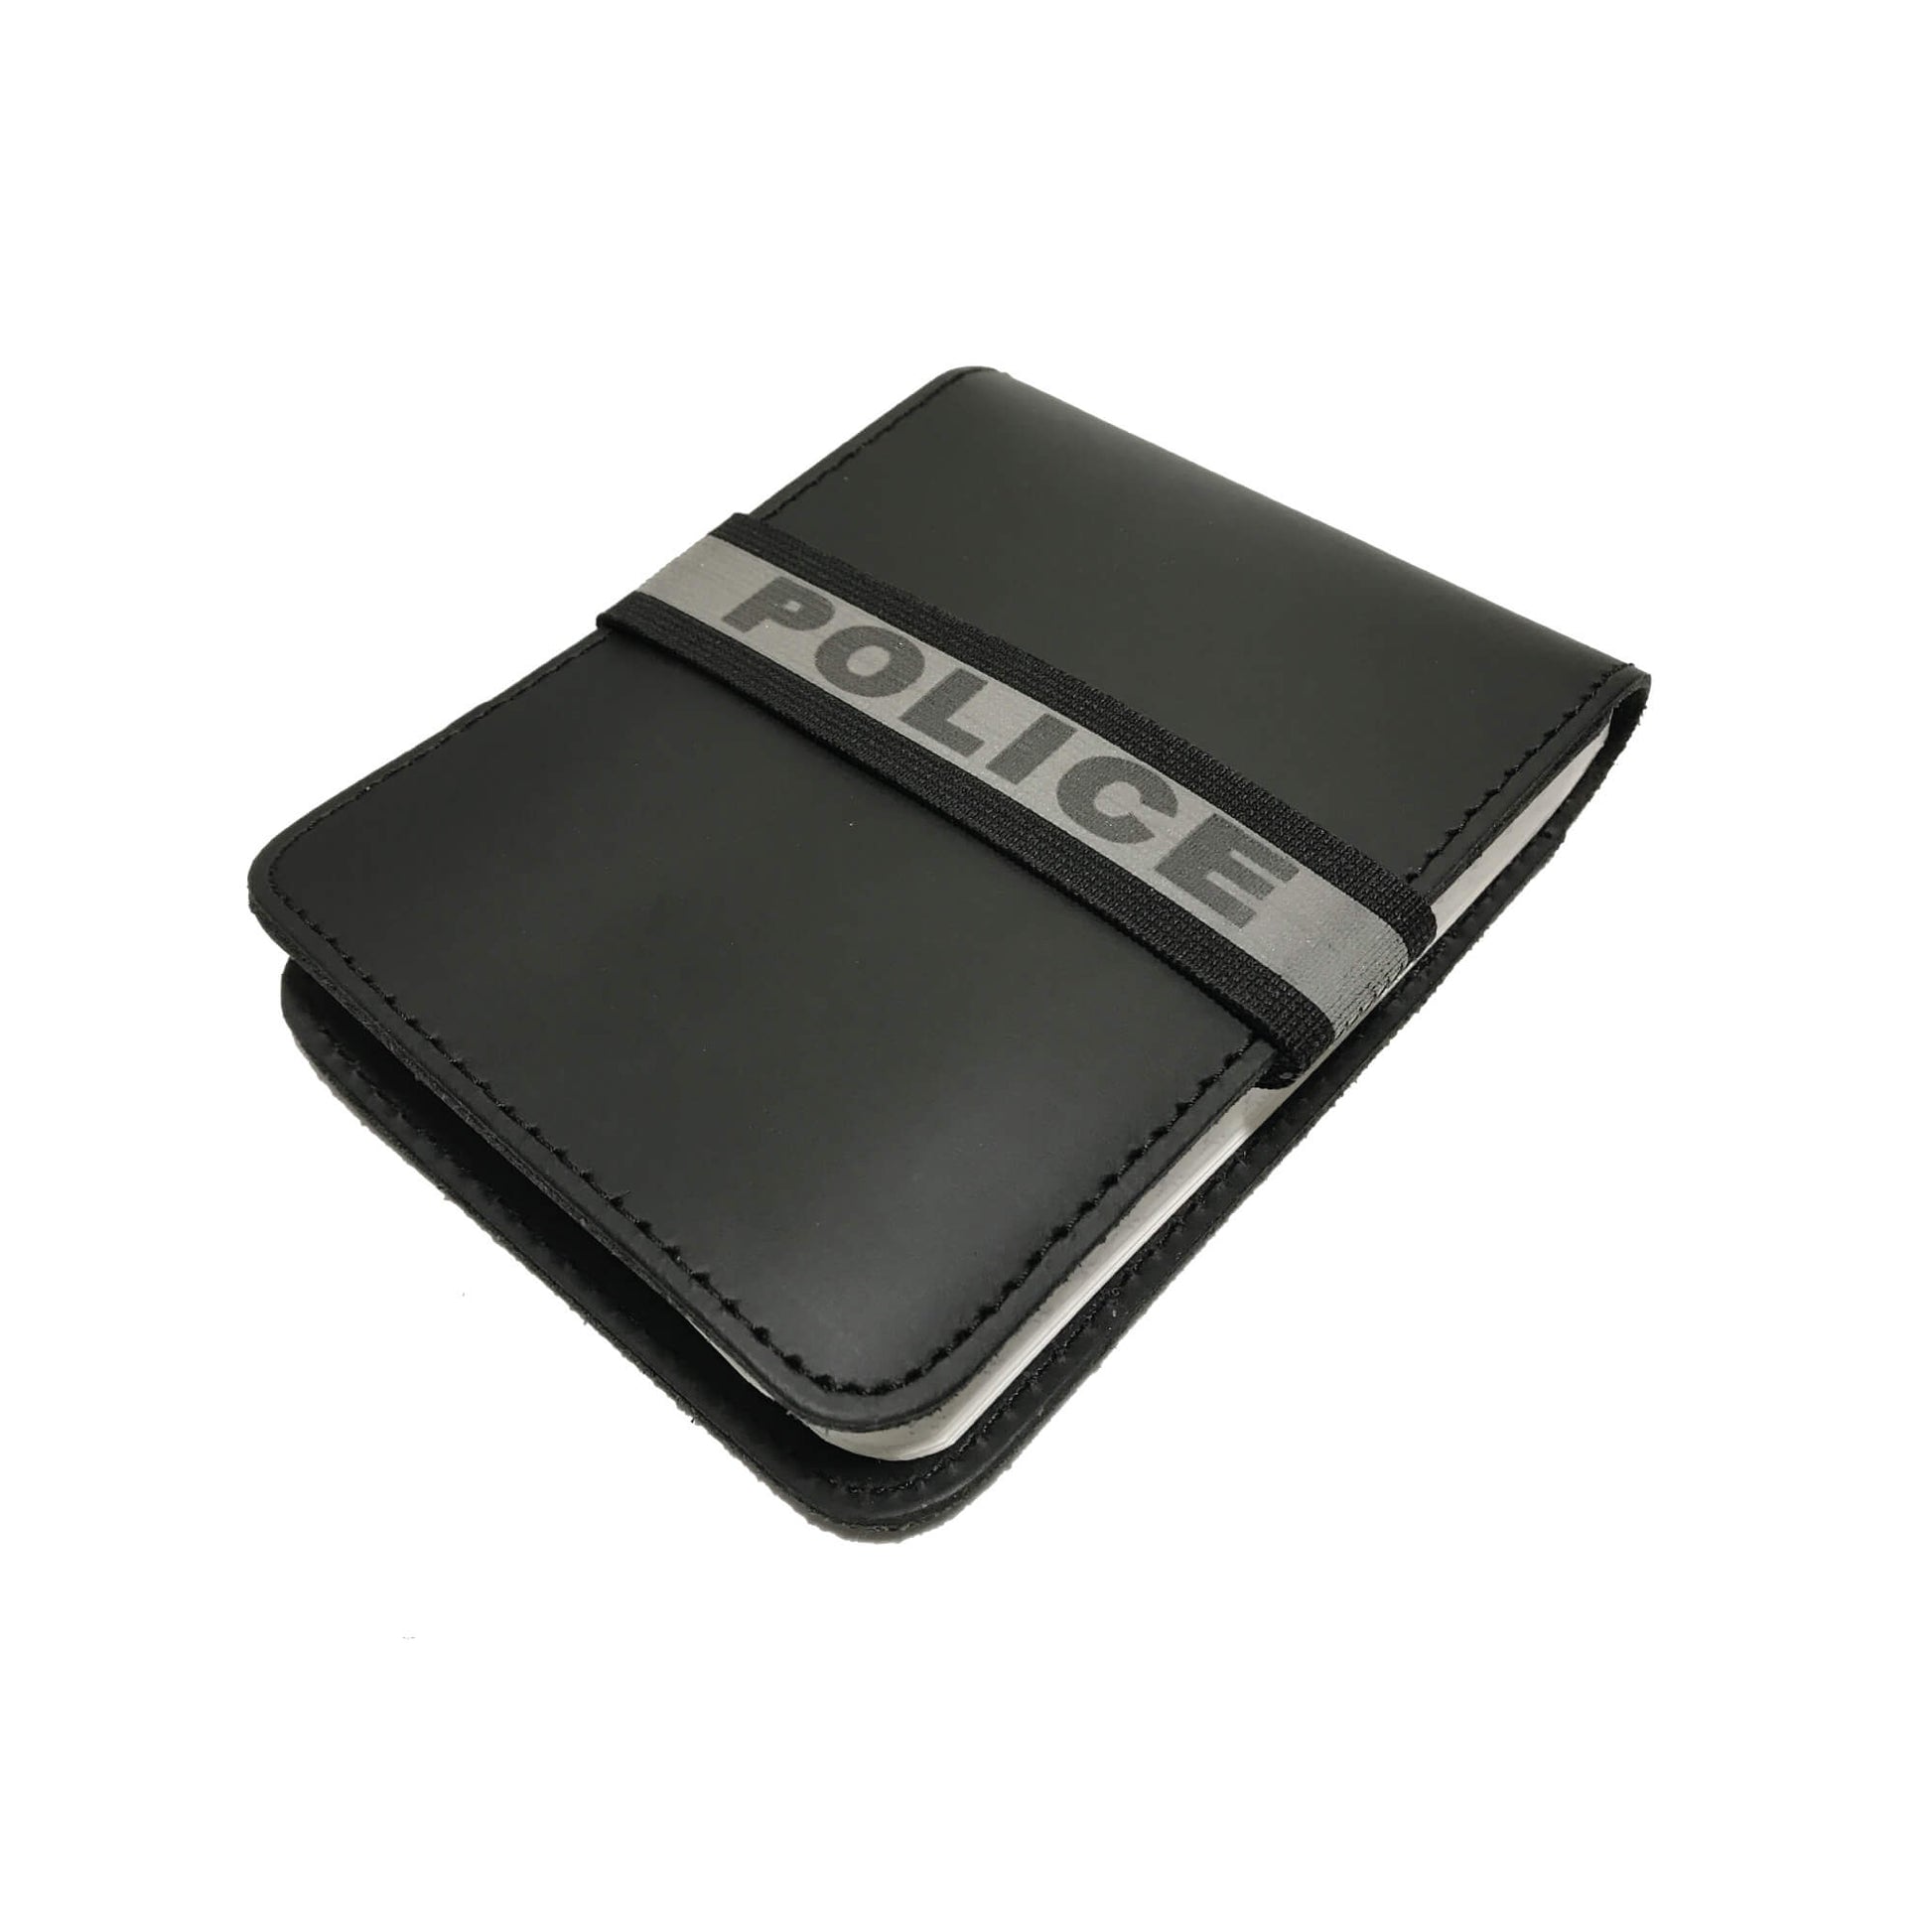 Owen Sound Police Notebook Cover-Perfect Fit-911 Duty Gear Canada